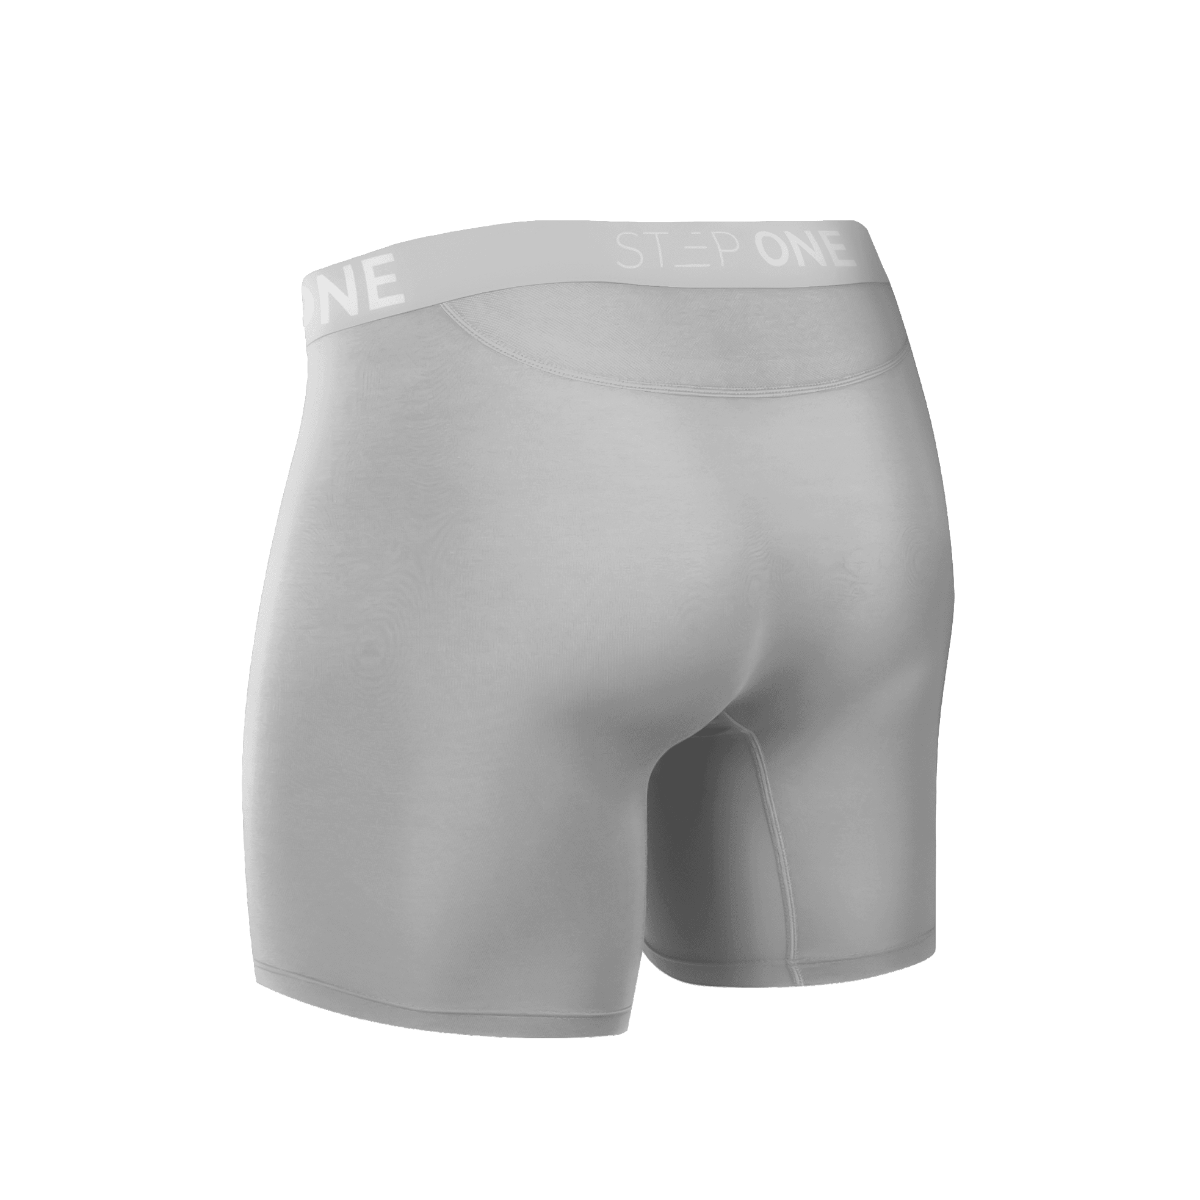 Boxer Brief Fly - Tin Cans | Step One Men's Underwear